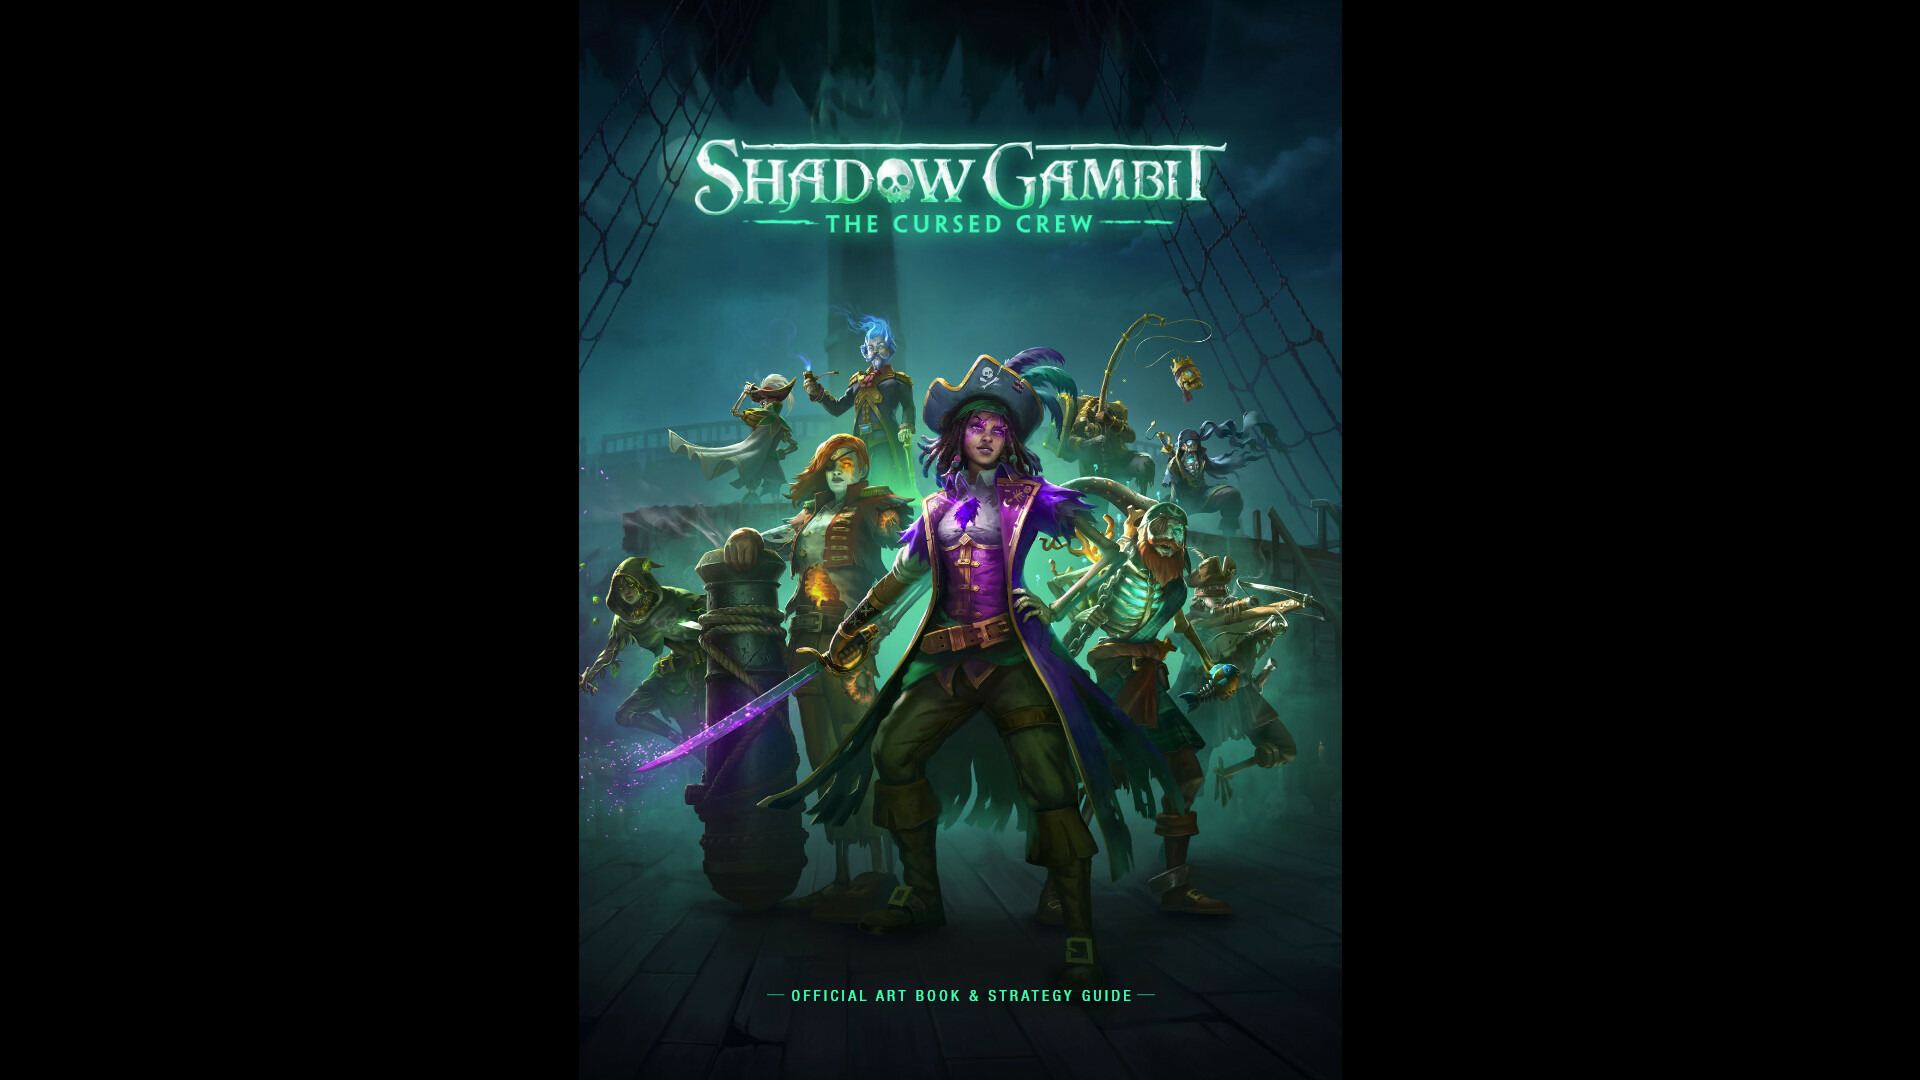 Shadow Gambit: The Cursed Crew Supporter Edition Epic Games Account 31.53 USD